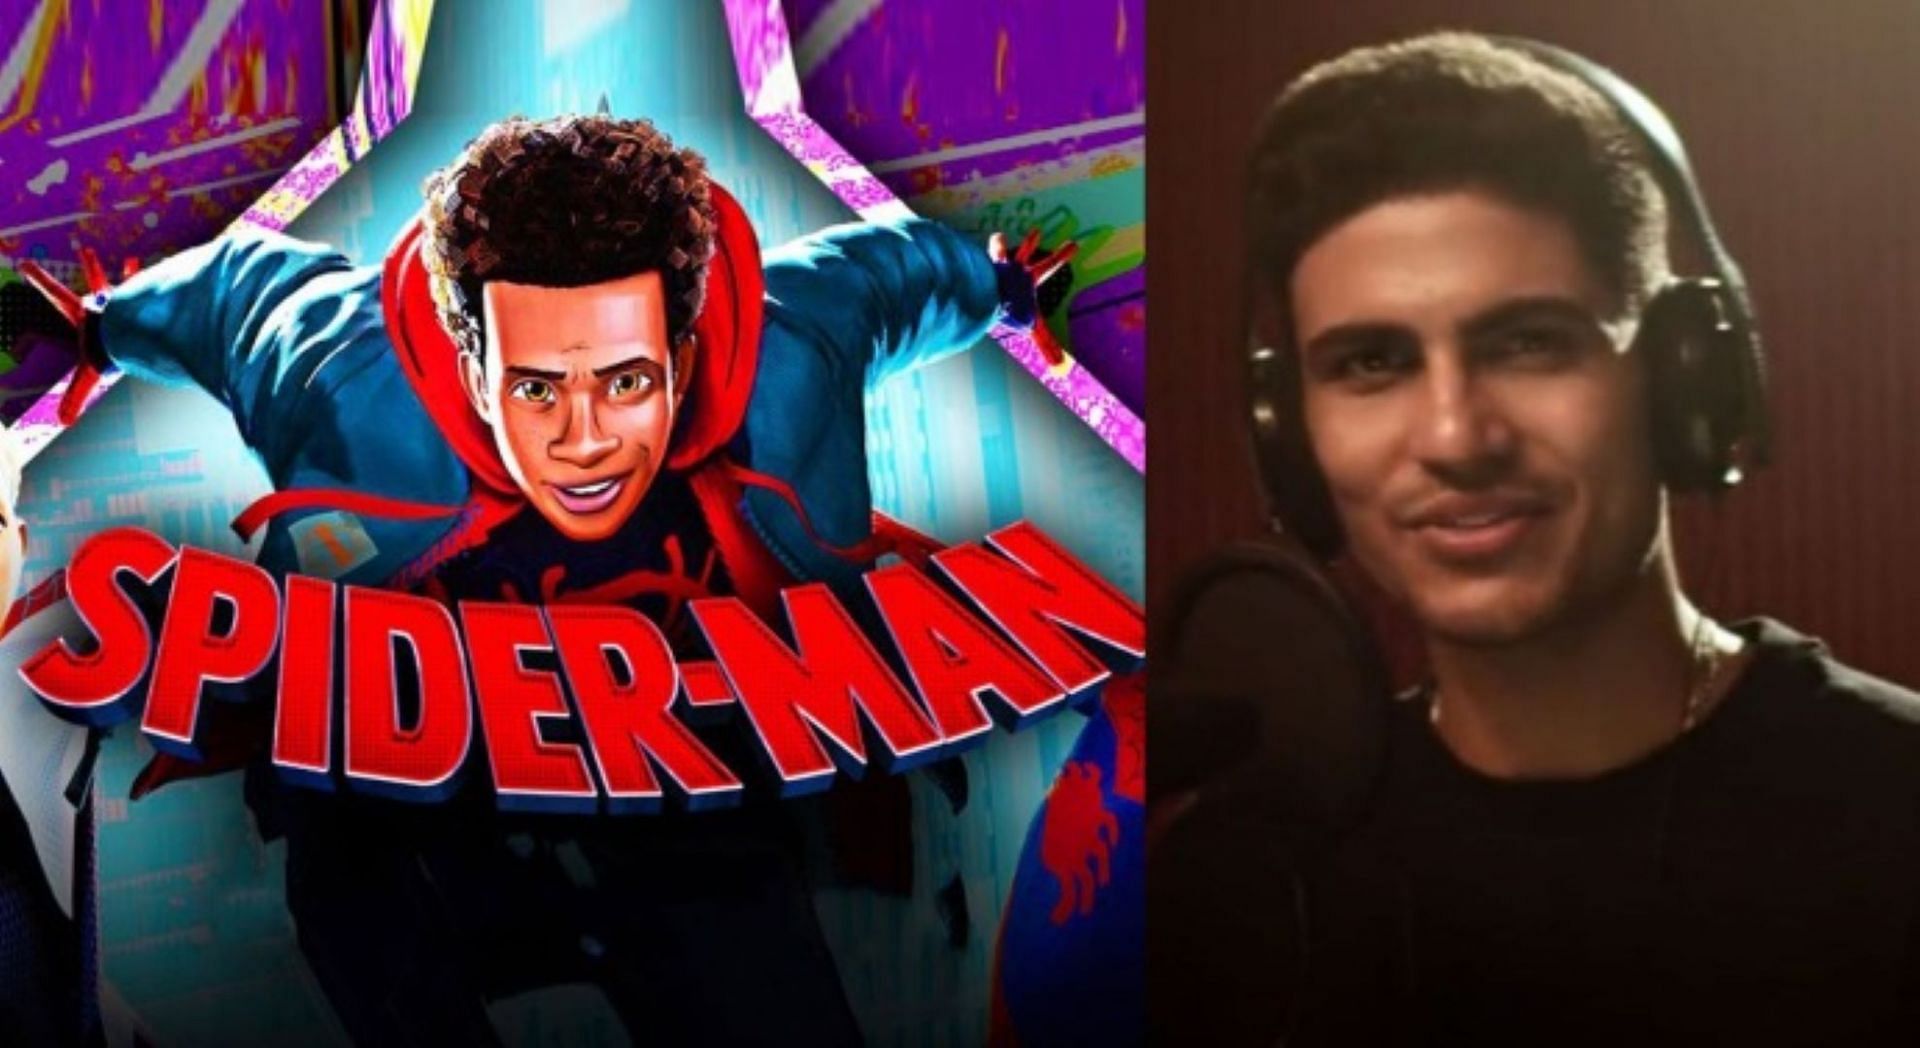 Shubman Gill will lend his voice to the Indian Spider-Man